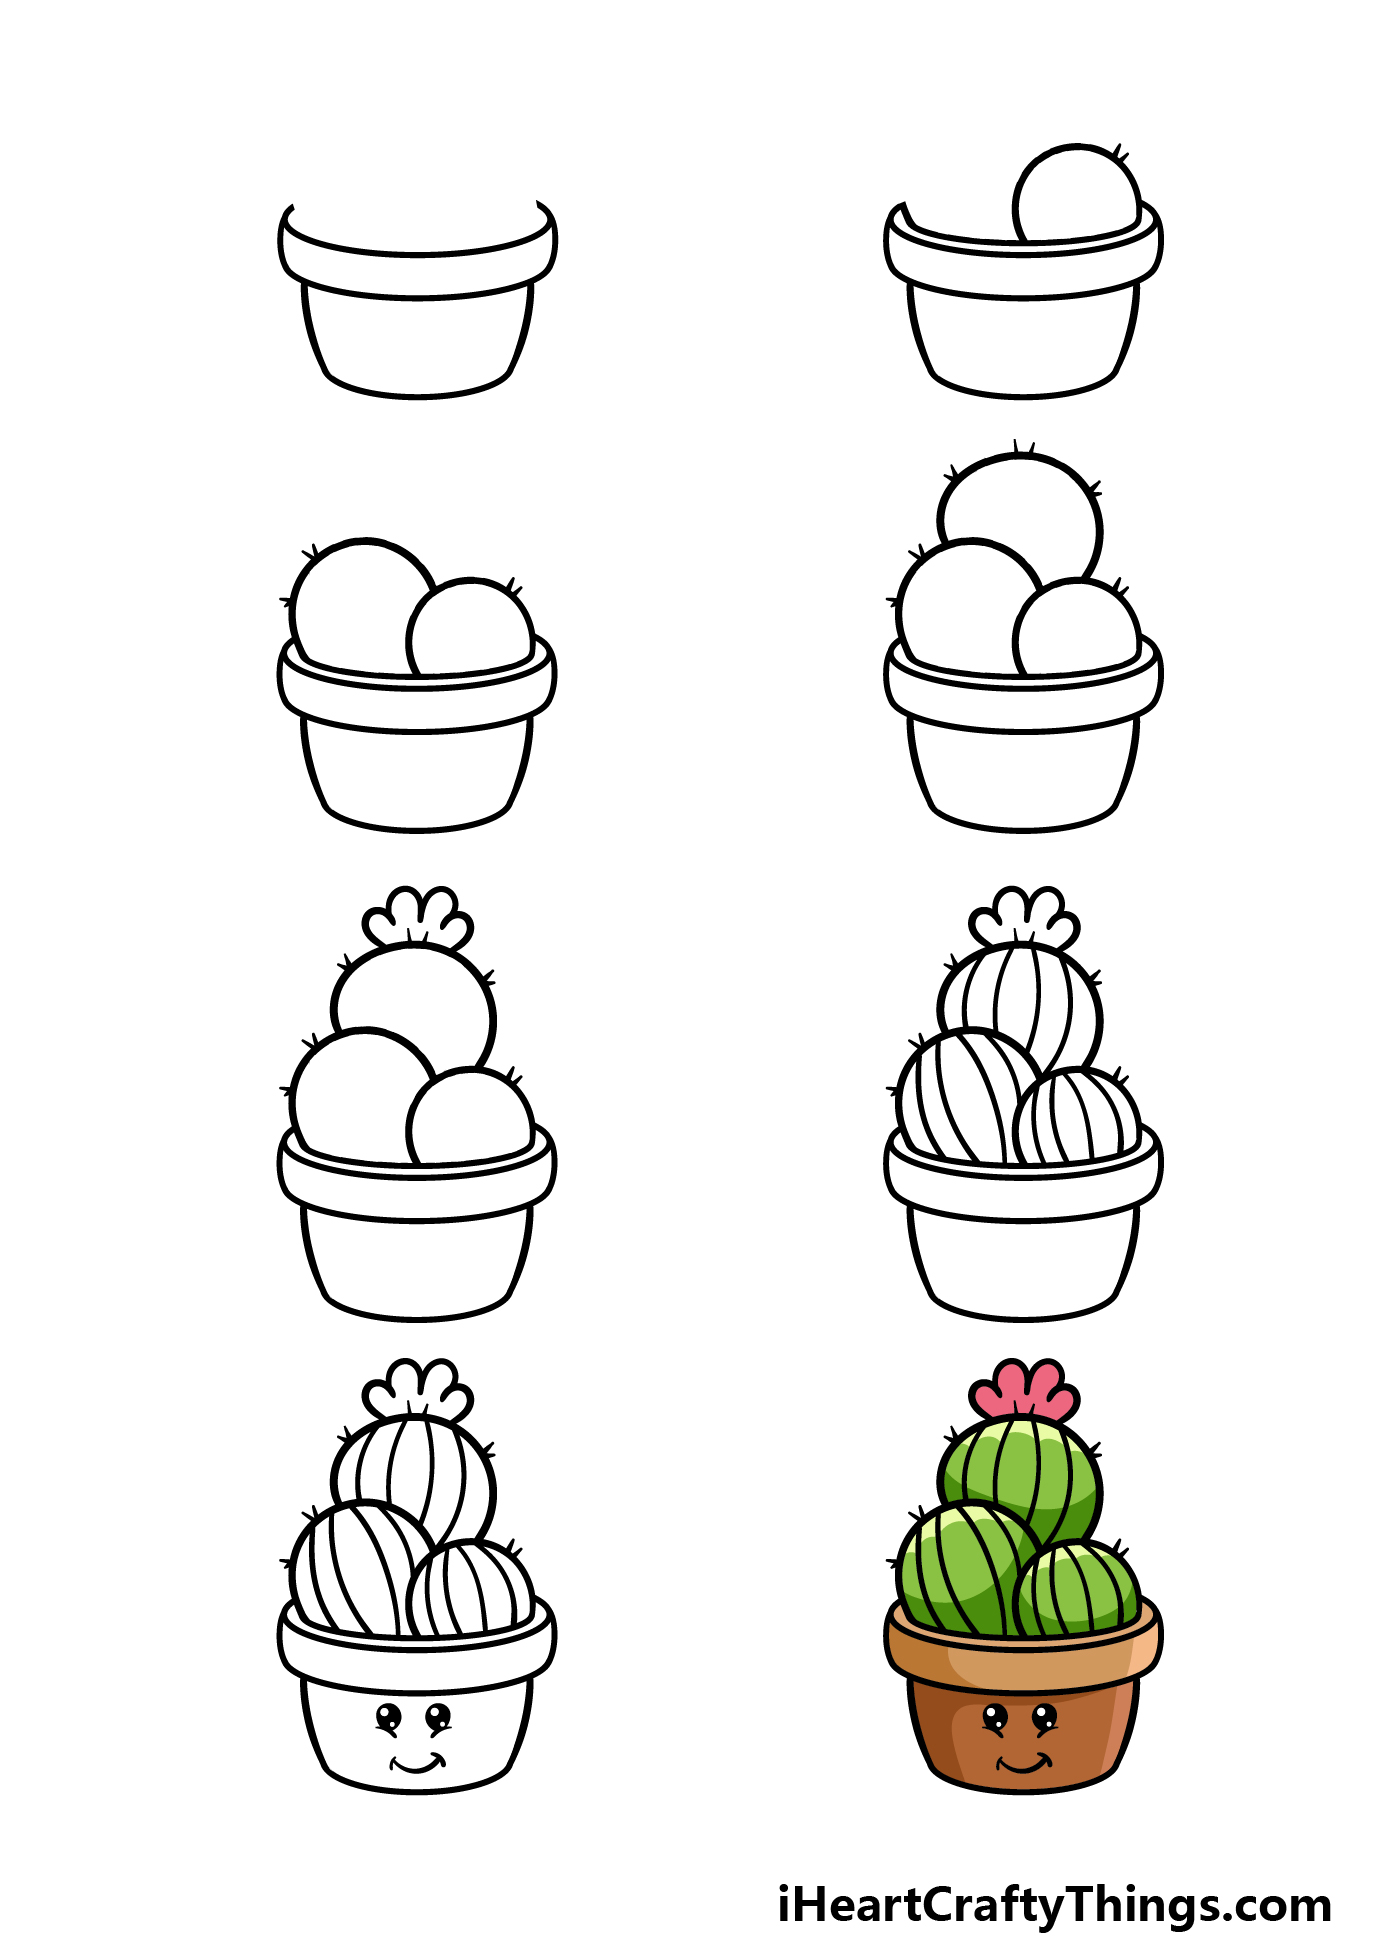 how to draw a cartoon plant in 8 steps